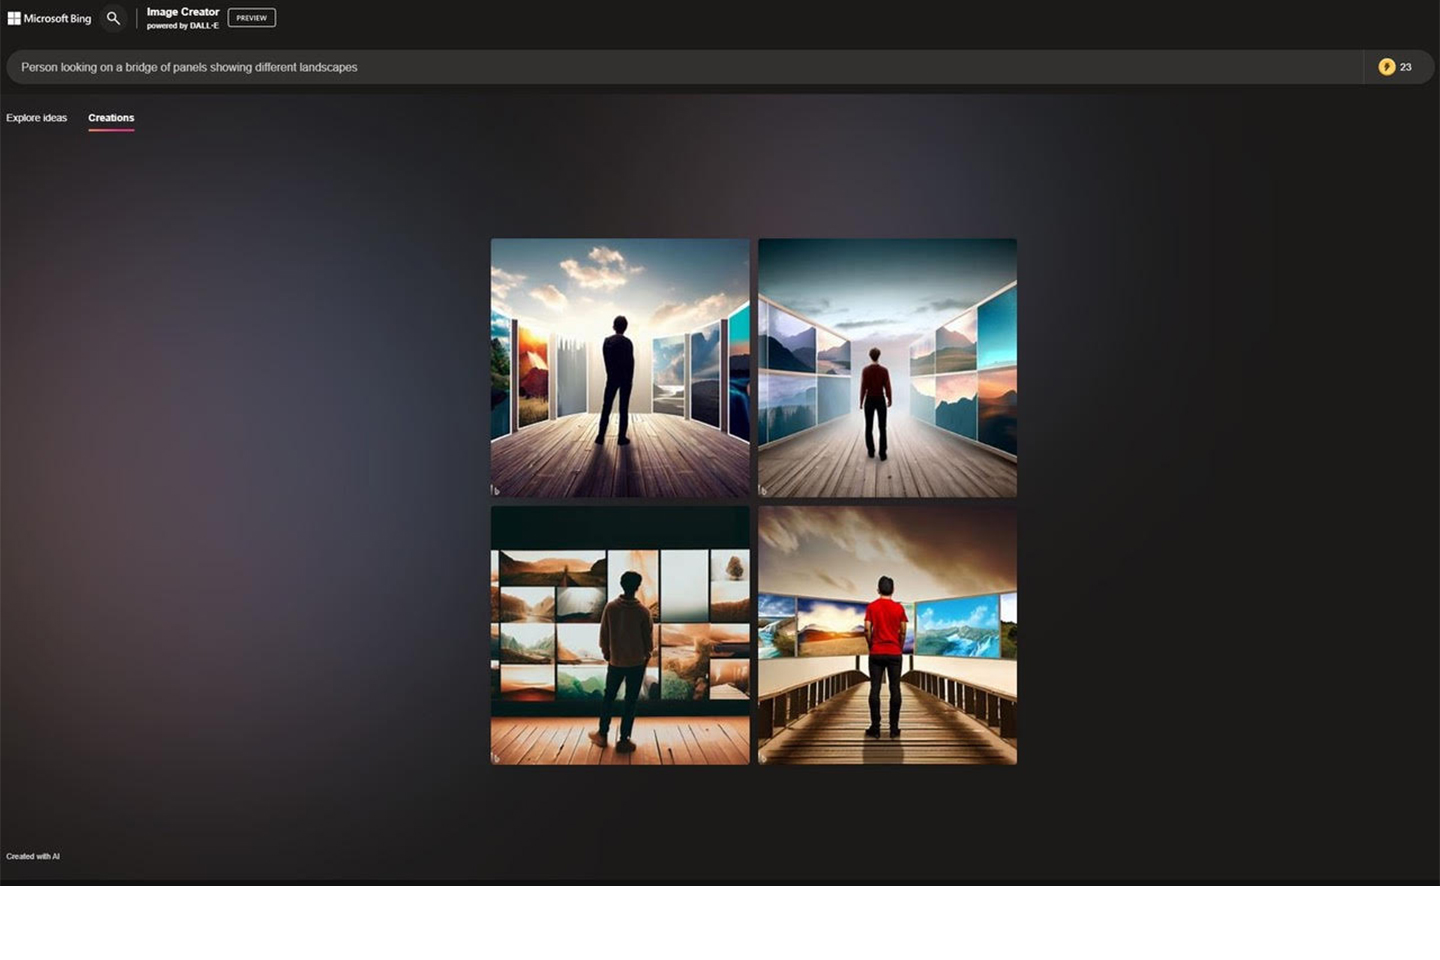 Screenshot of Bing Image Creator with the prompt 'Person looking on a bridge of panels showing different landscapes'